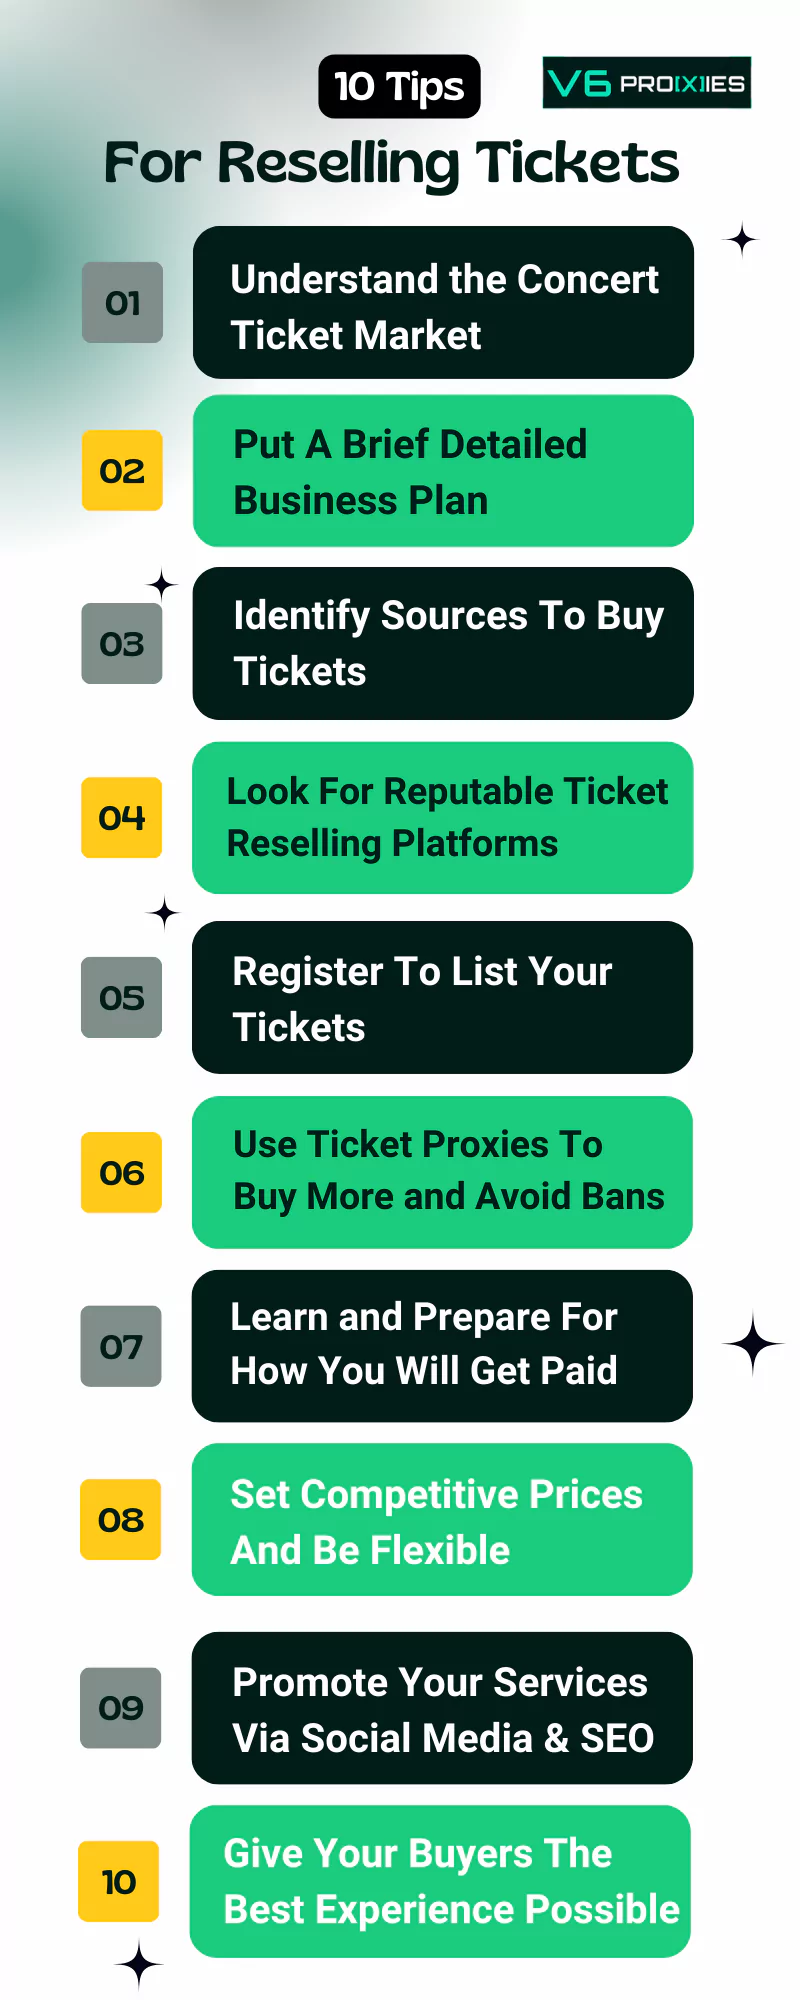 Infographic with heading "10 Tips For Reselling Tickets" and 10 numbered steps outlined: 1) Understand the concert ticket market. 2) Put a brief detailed business plan. 3) Identify sources to buy tickets. 4) Look for reputable ticket reselling platforms. 5) Register to list your tickets. 6) Use ticket proxies to buy more and avoid bans. 7) Learn and prepare for how you will get paid. 8) Set competitive prices and be flexible. 9) Promote your services via social media and SEO. 10) Give your buyers the best experience possible.